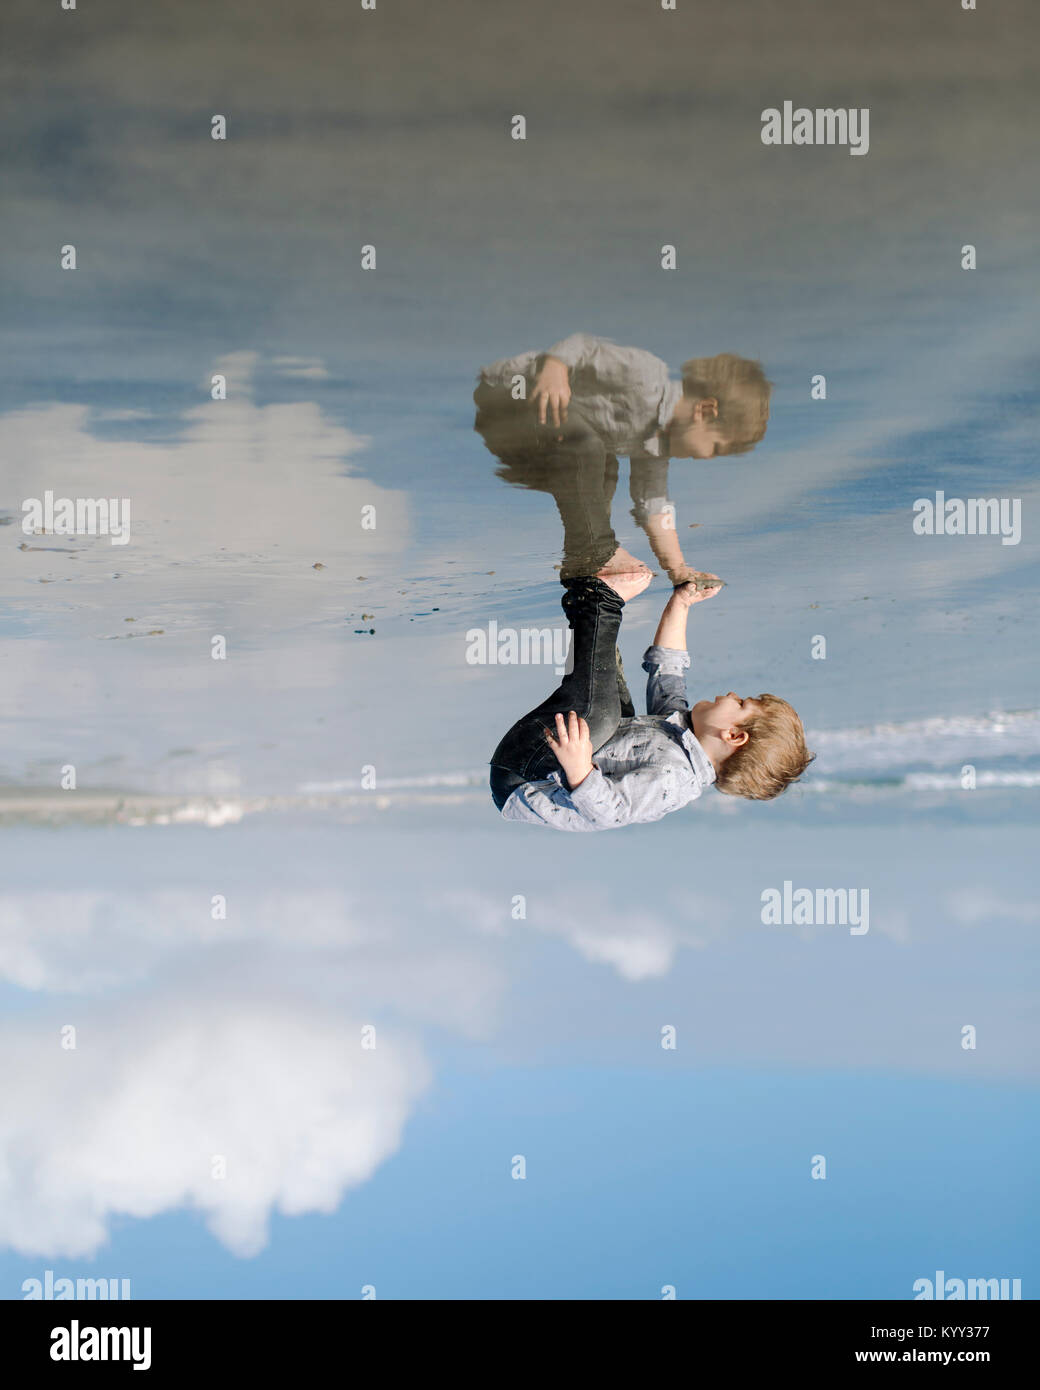 Upside down image of boy playing on shore at beach against cloudy sky Stock Photo